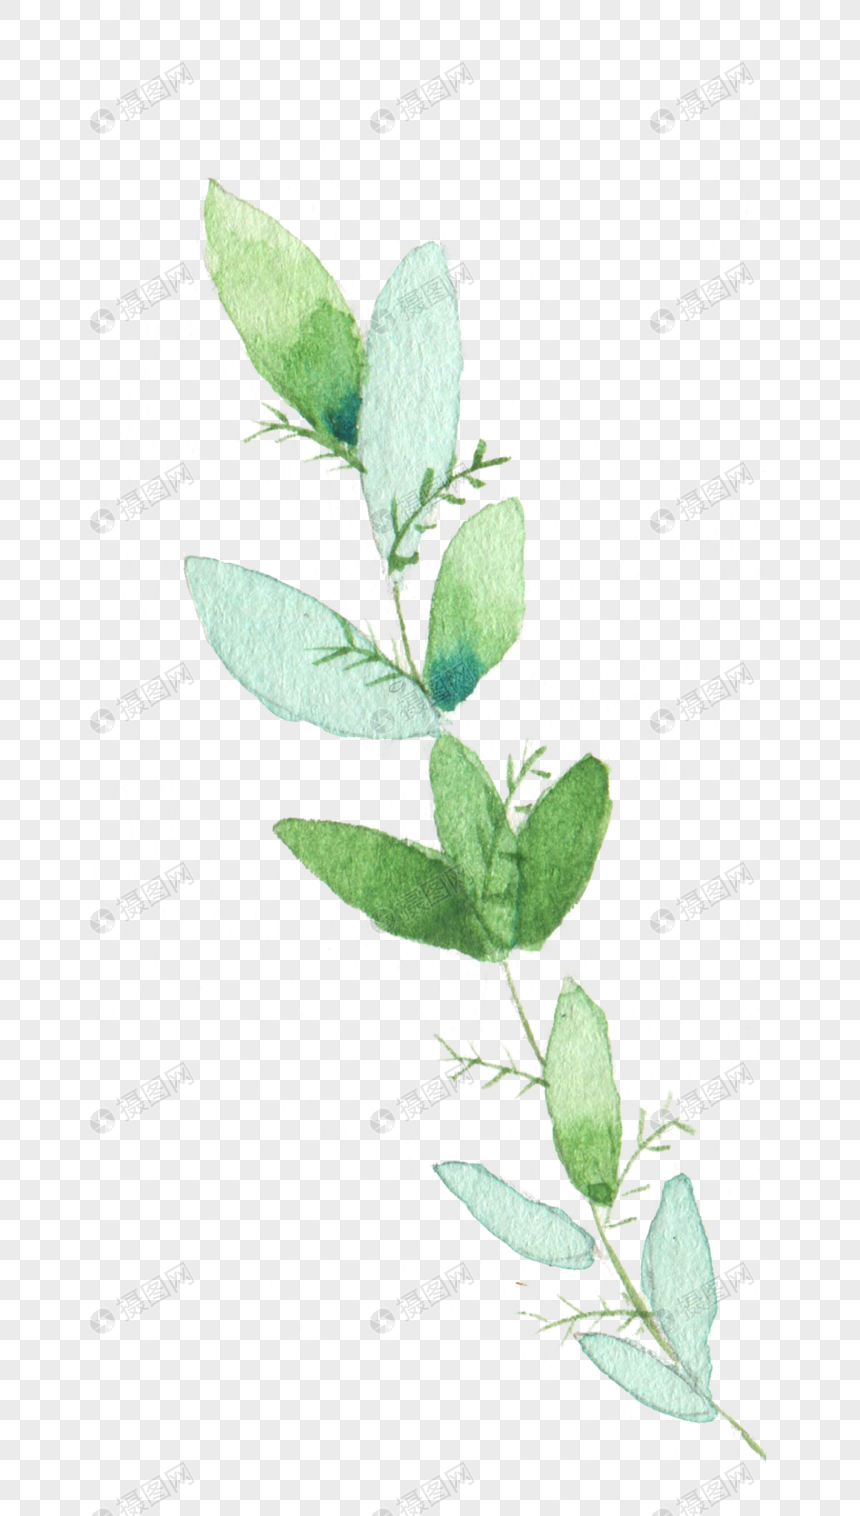 Watercolor Hand Painted Plant Material PNG Transparent And Clipart ...